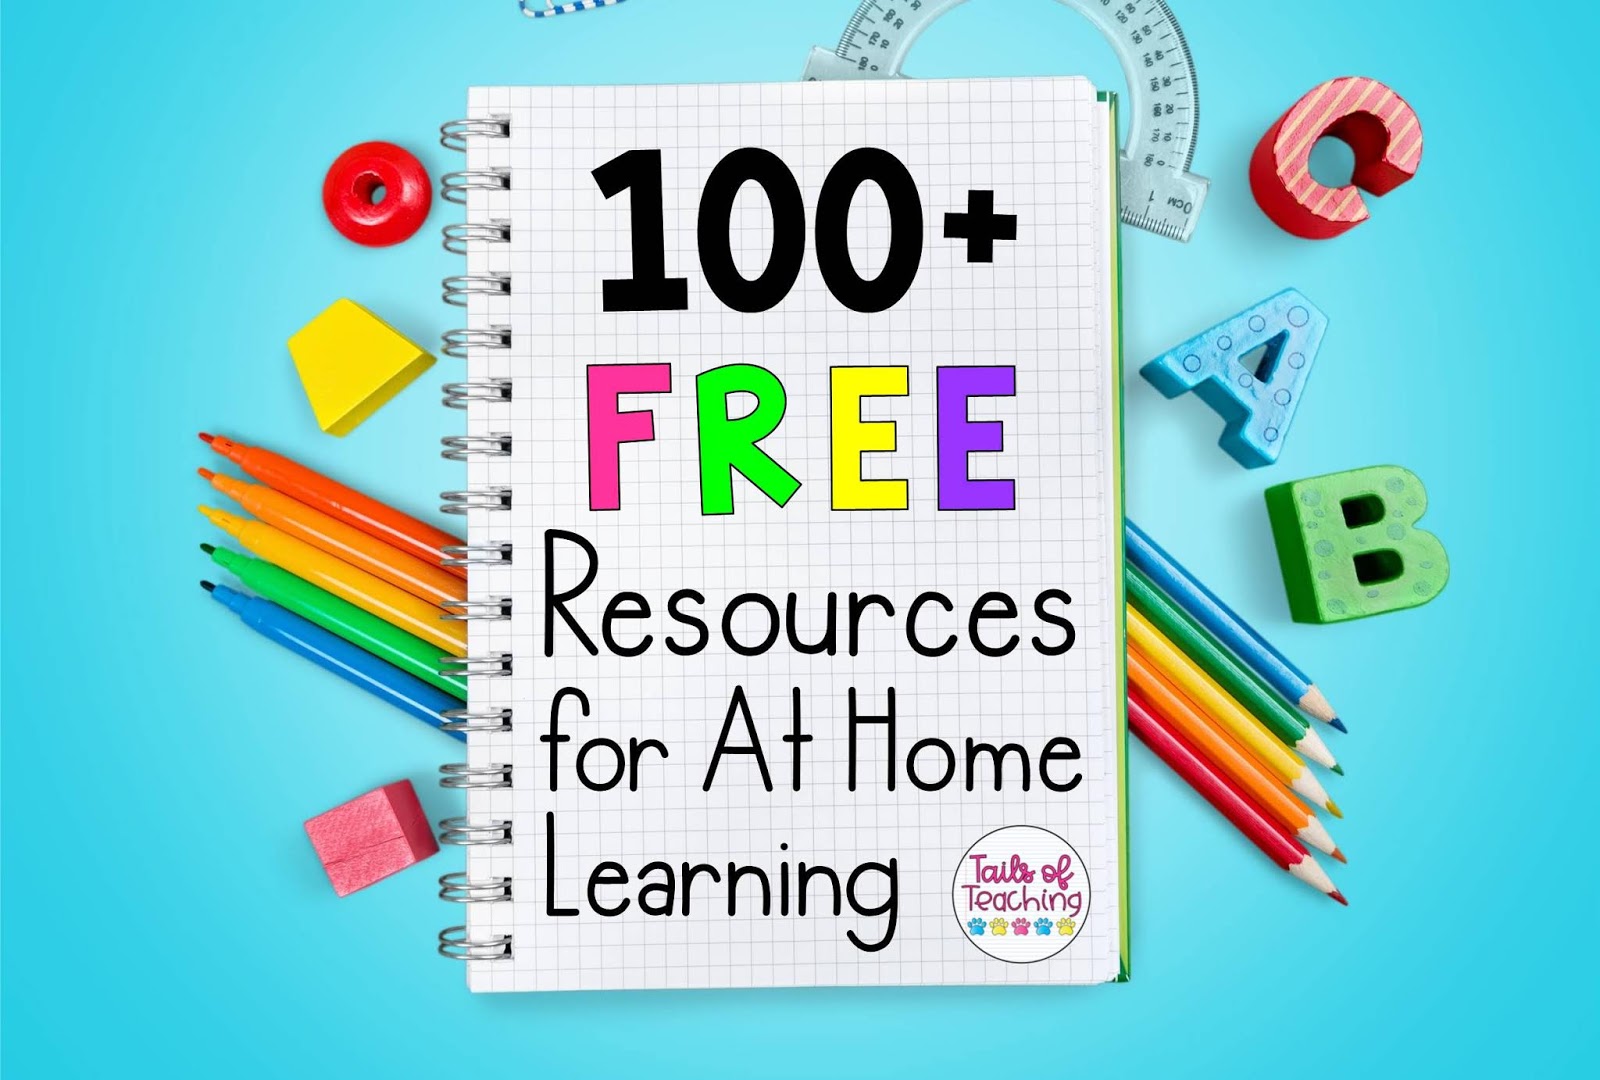 Tails of Teaching 100+ FREE Resources for At Home Learning